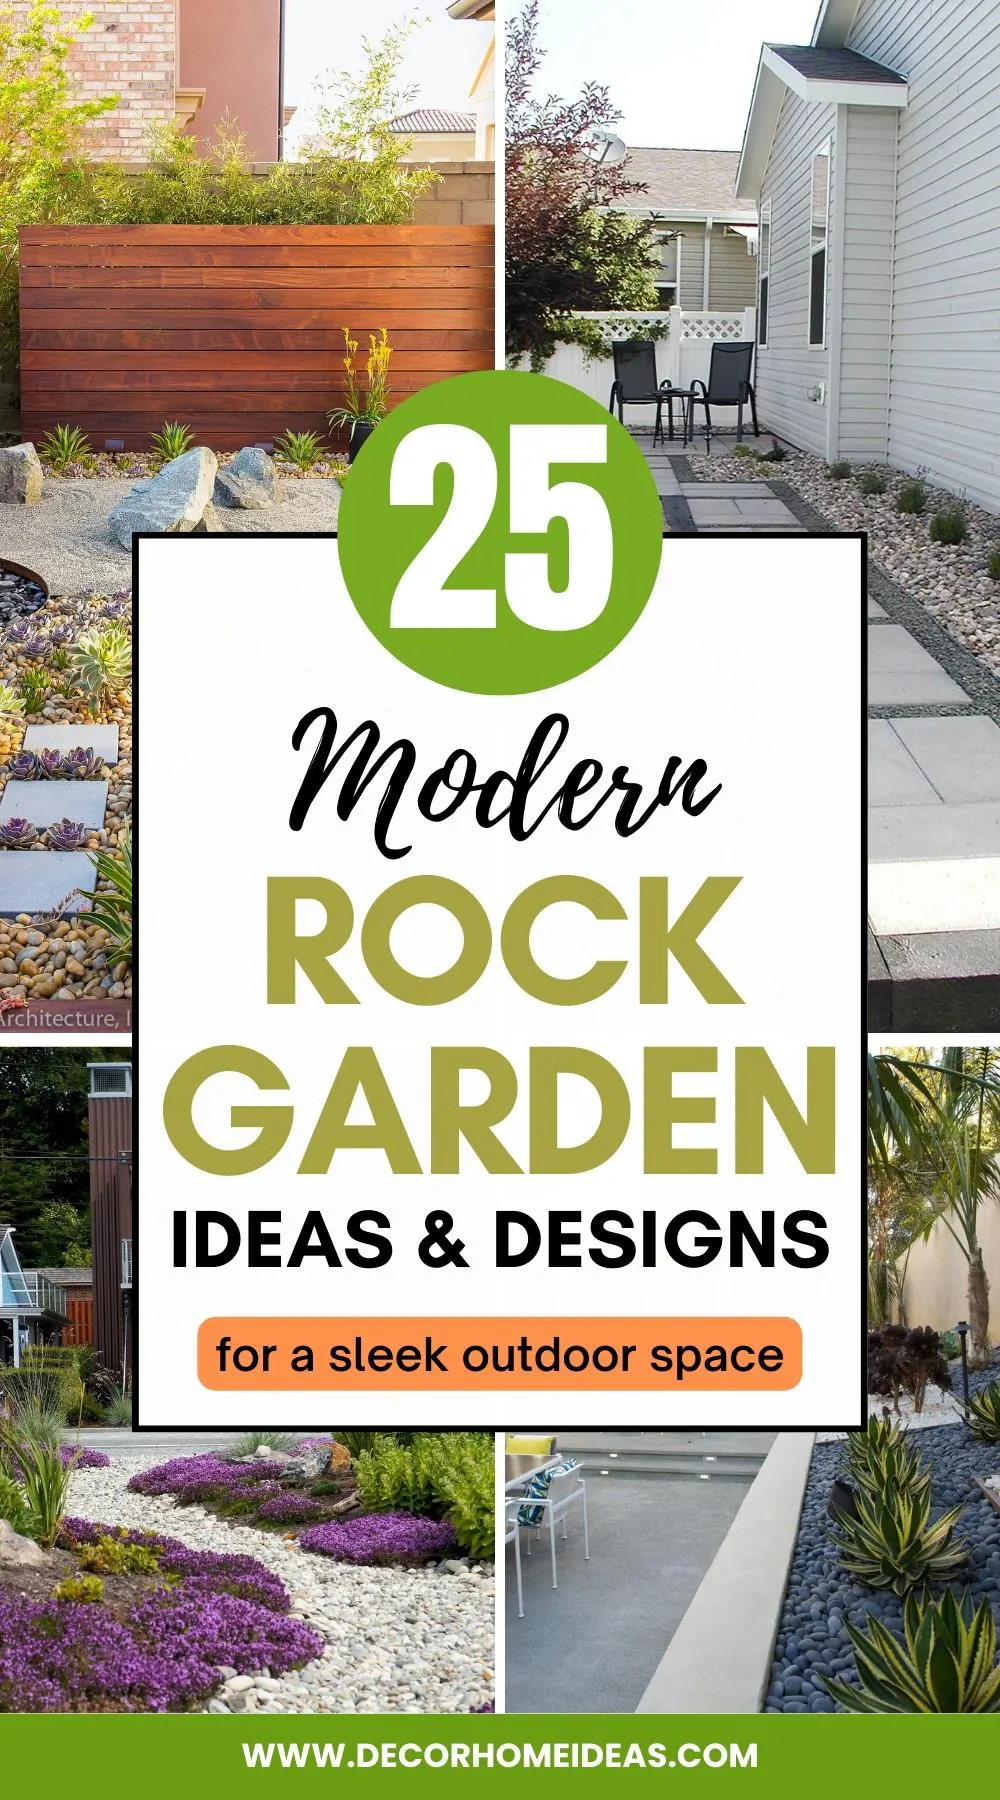 Modern rock garden ideas incorporate sleek design elements such as minimalism, geometric shapes, and contrasting textures to create an updated take on traditional rock gardens. 